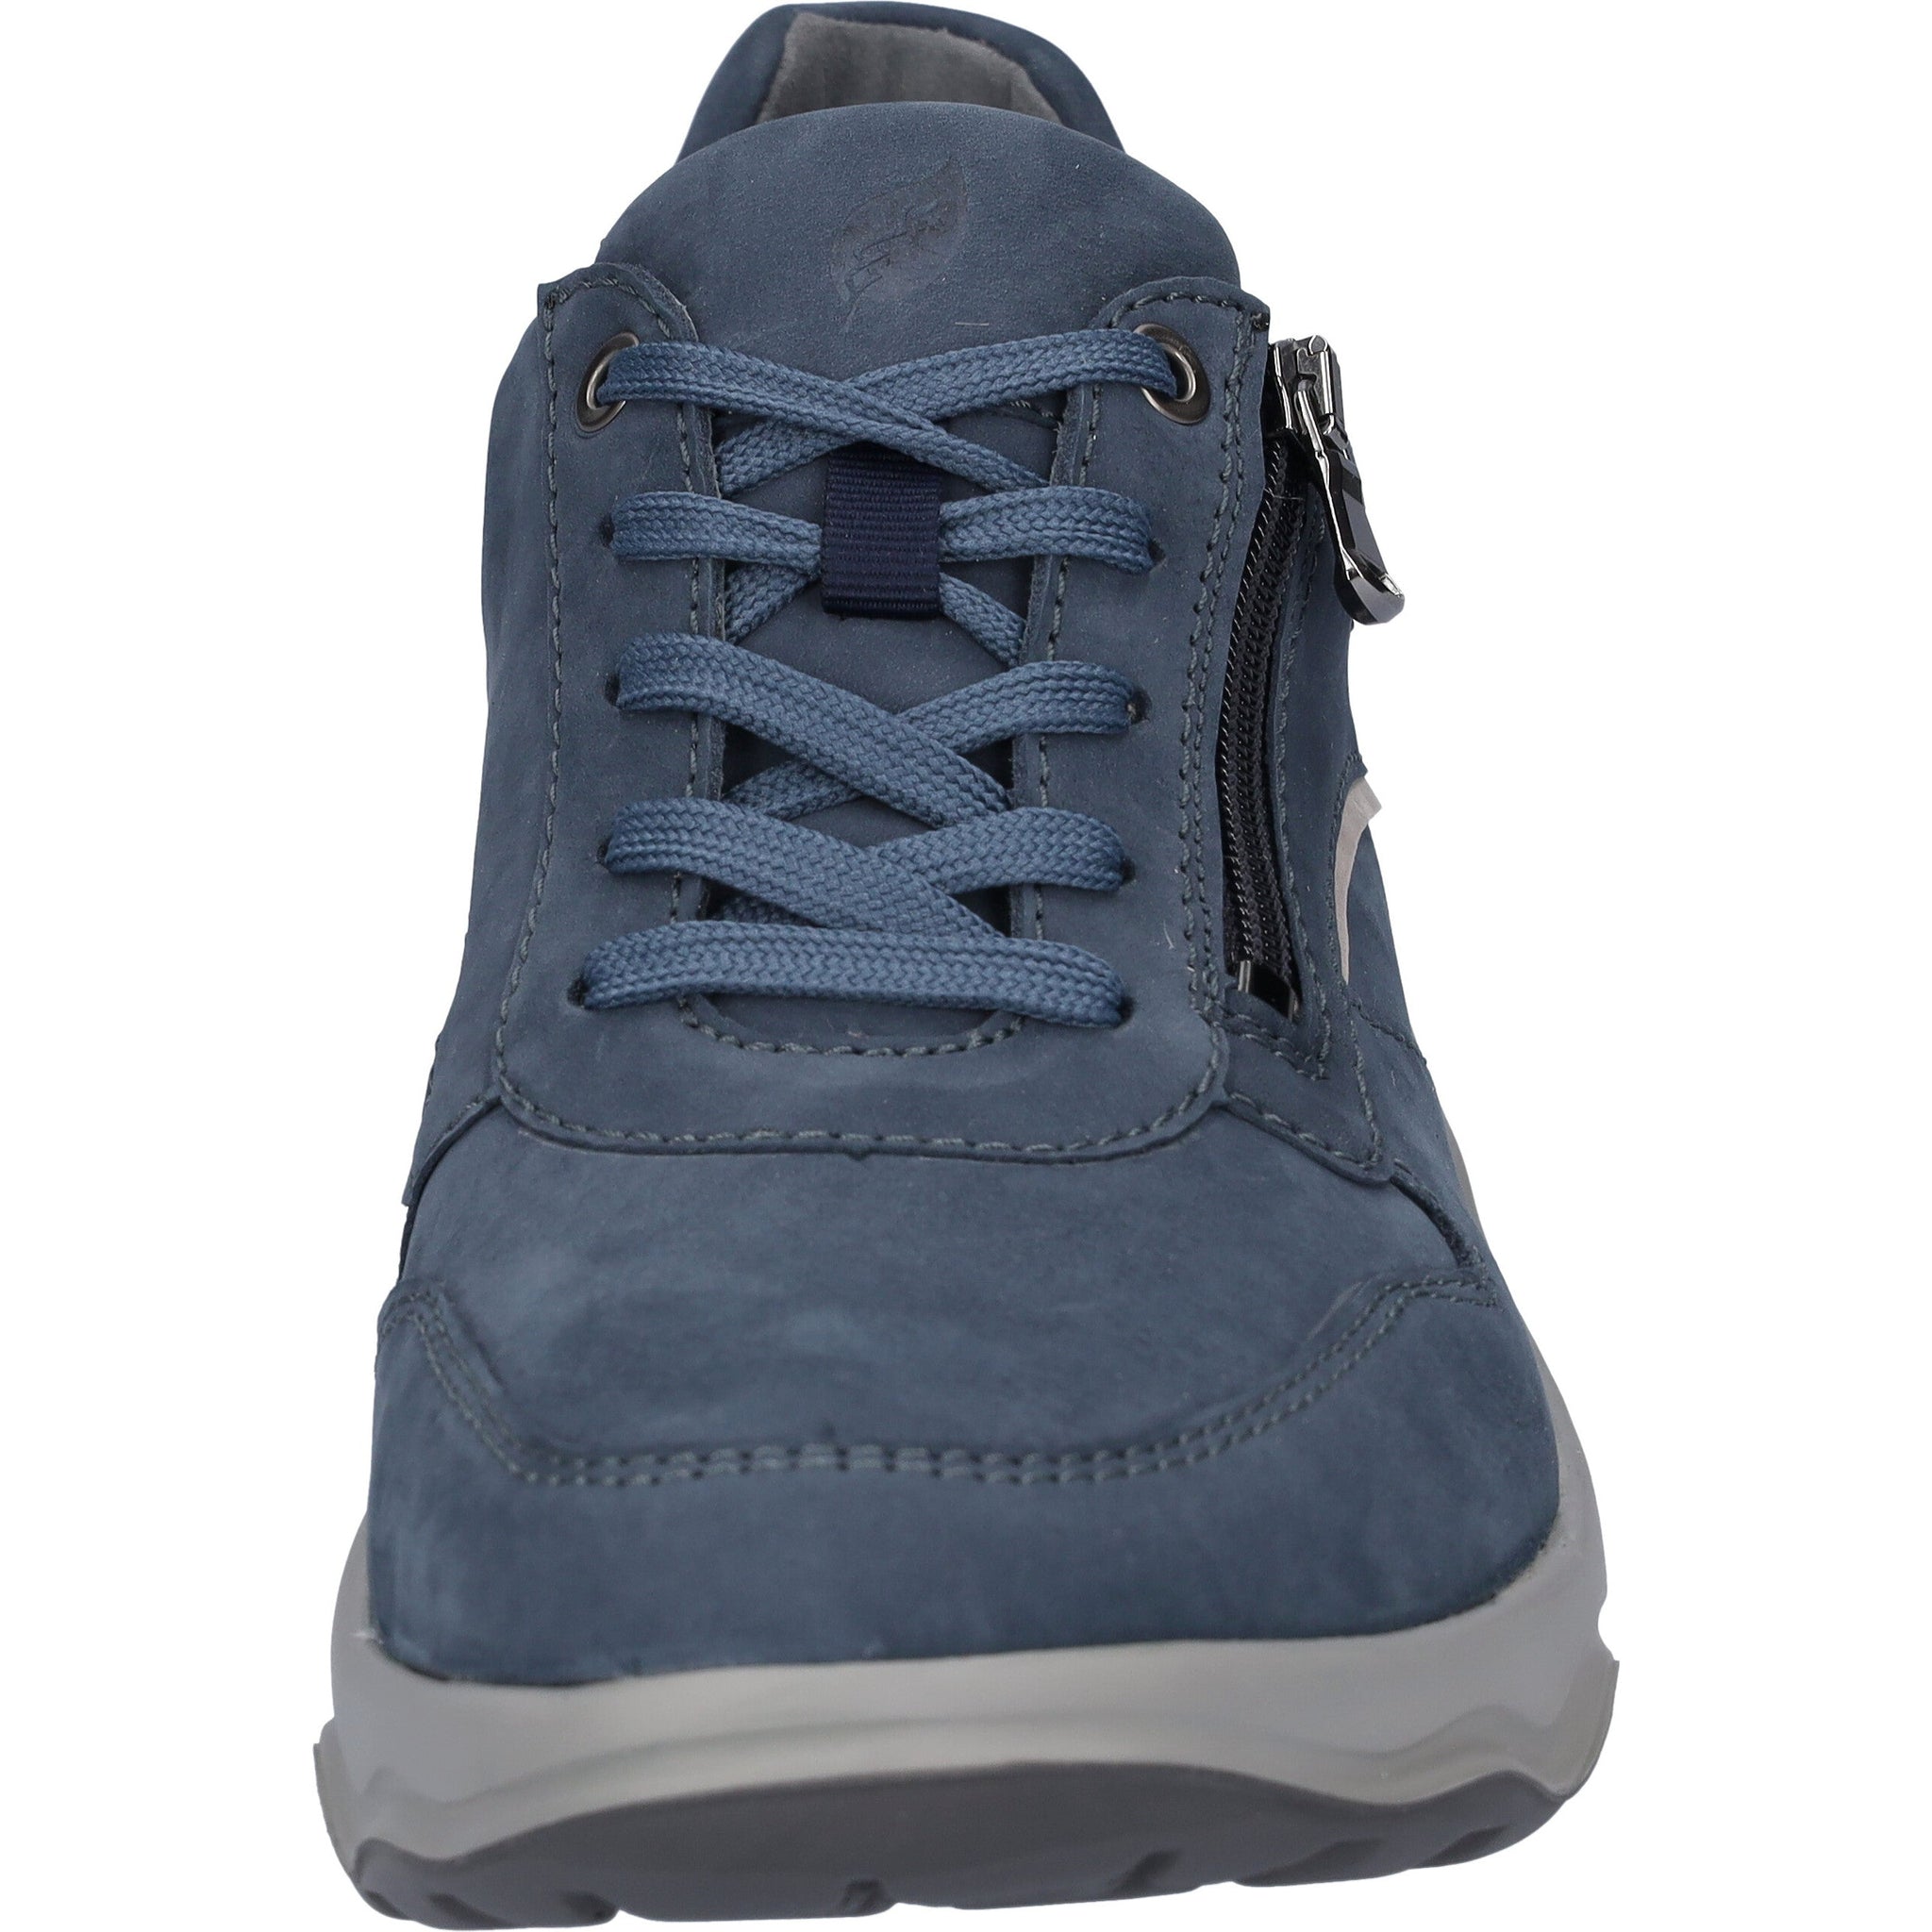 Waldlaufer H-Max (718006) - Men's Lace up with Zip Shoe-Wide Fit .Waldlaufer  | Wide Fit Shoes | Wisemans | Bantry | West Cork | Ireland